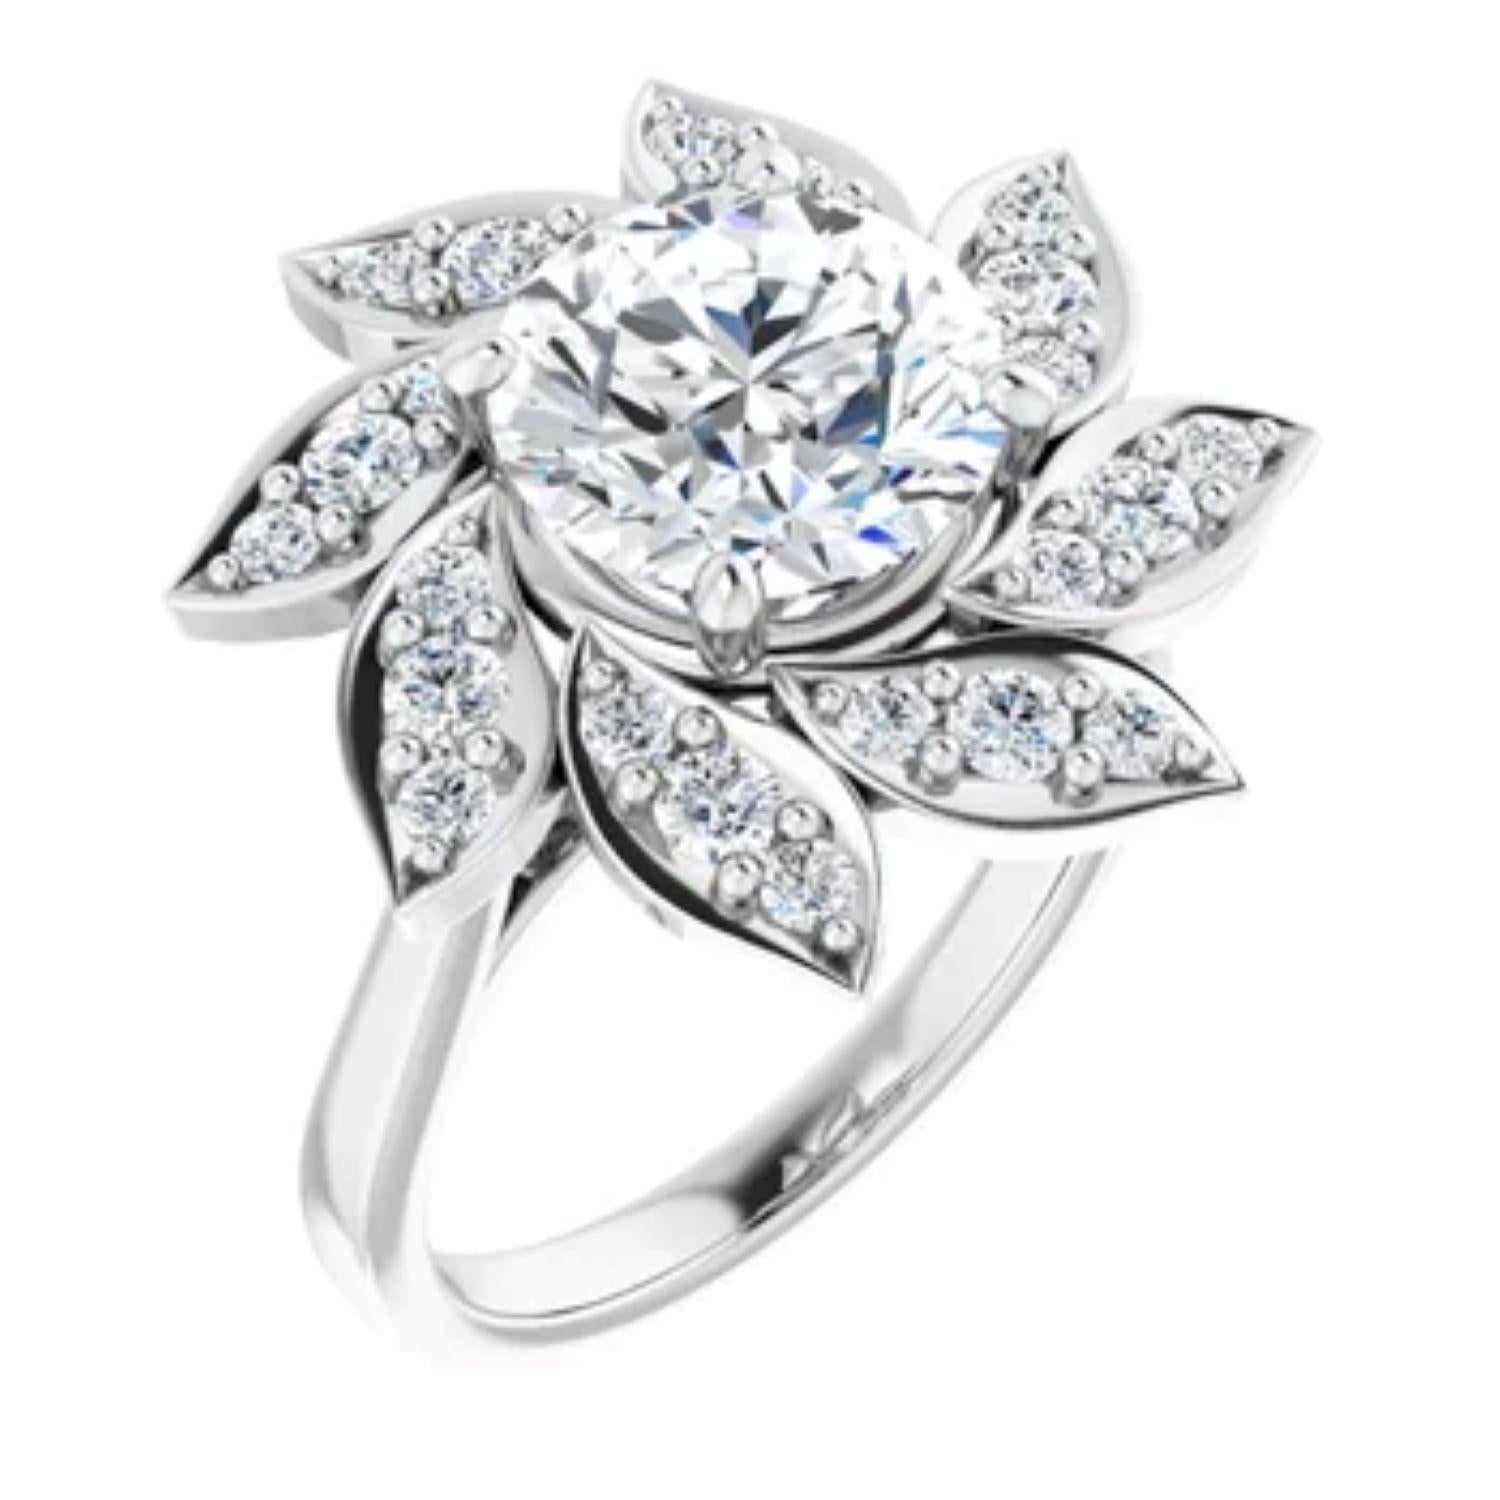 Women's Daisy inspired engagement ring For Sale